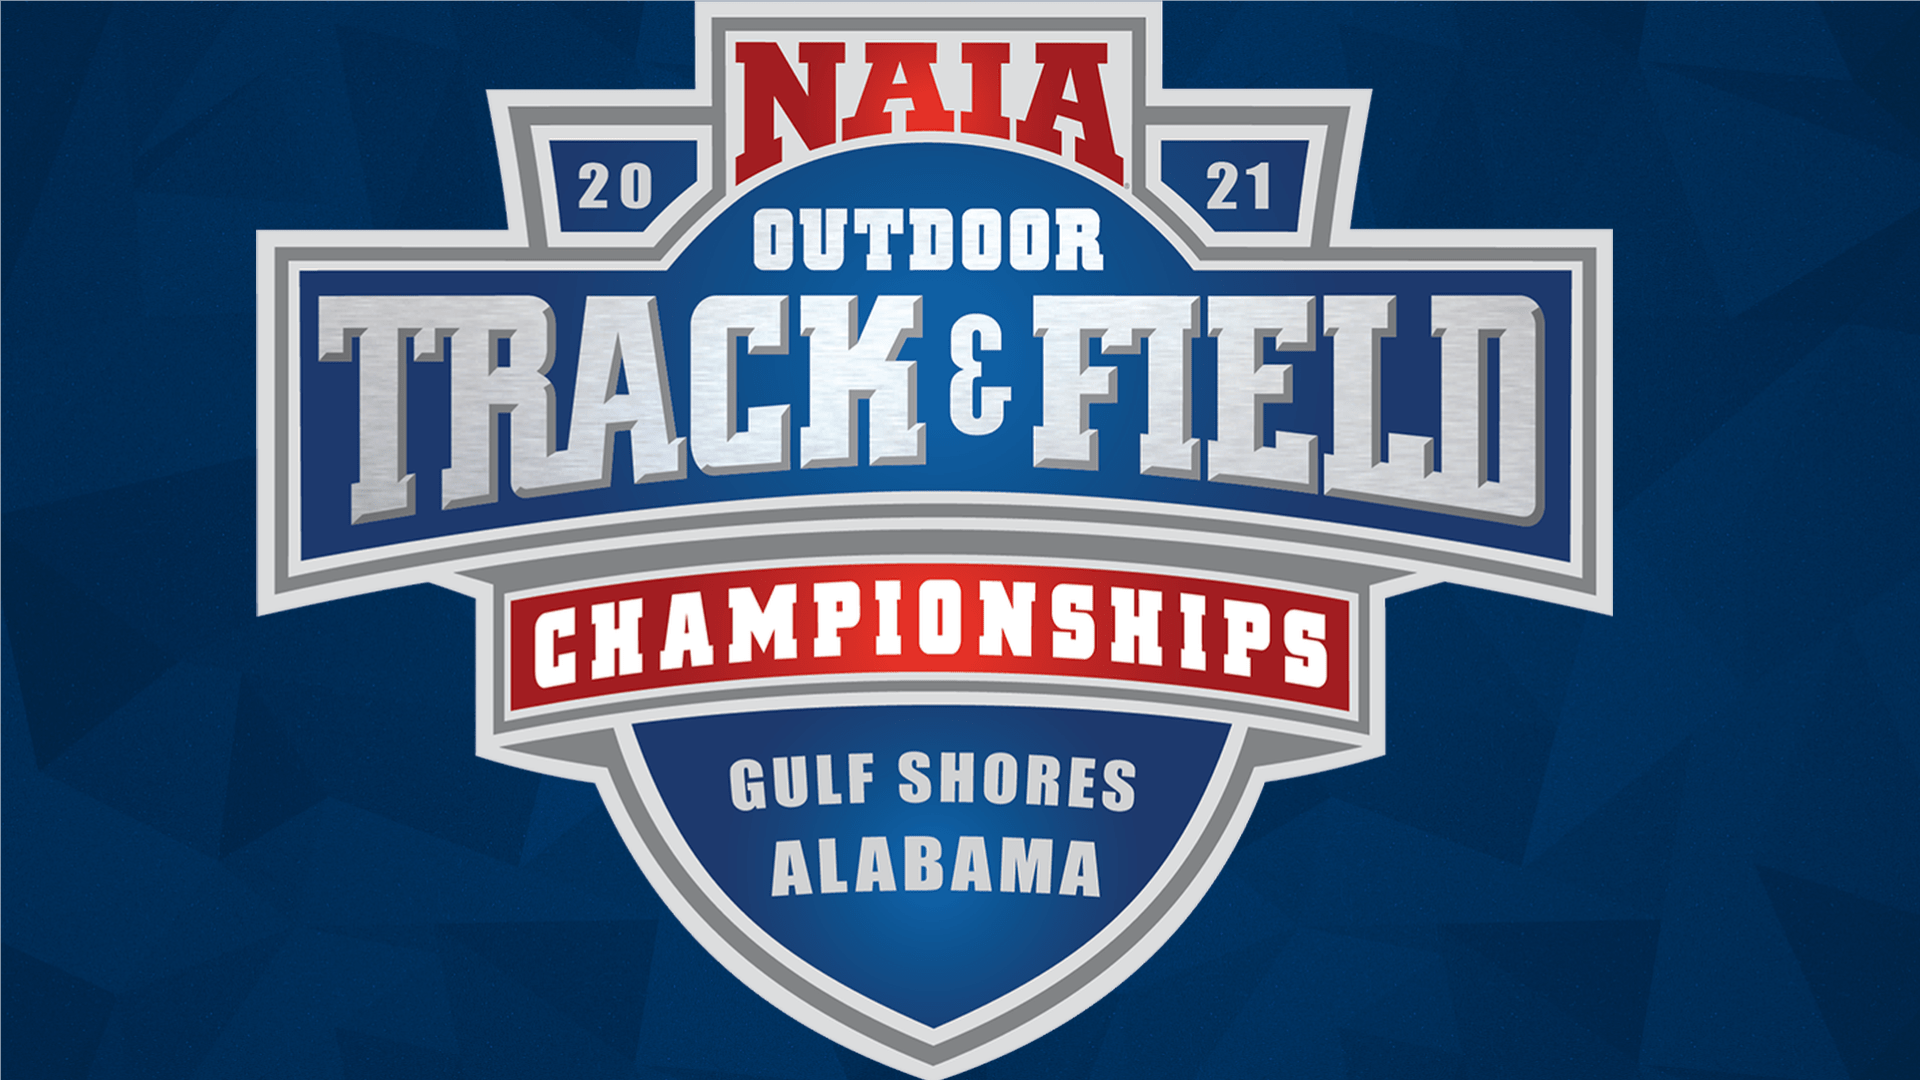 NAIA Outdoor Track and Field National Championships set for Wednesday